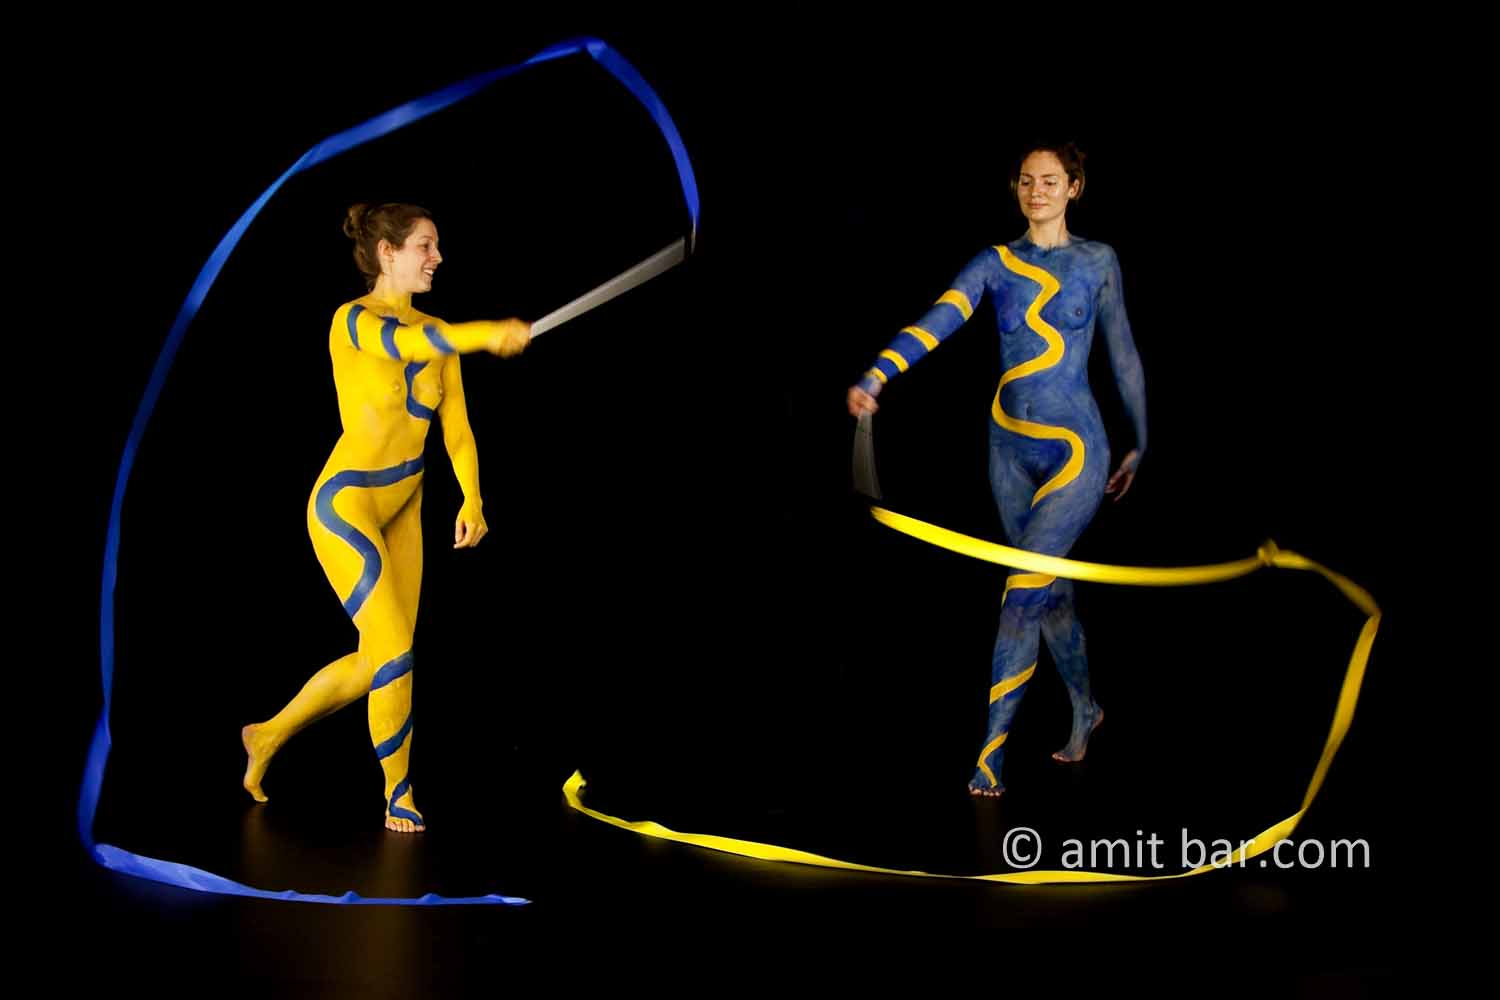 Two ribbons II: body-painted dancers with ribbons